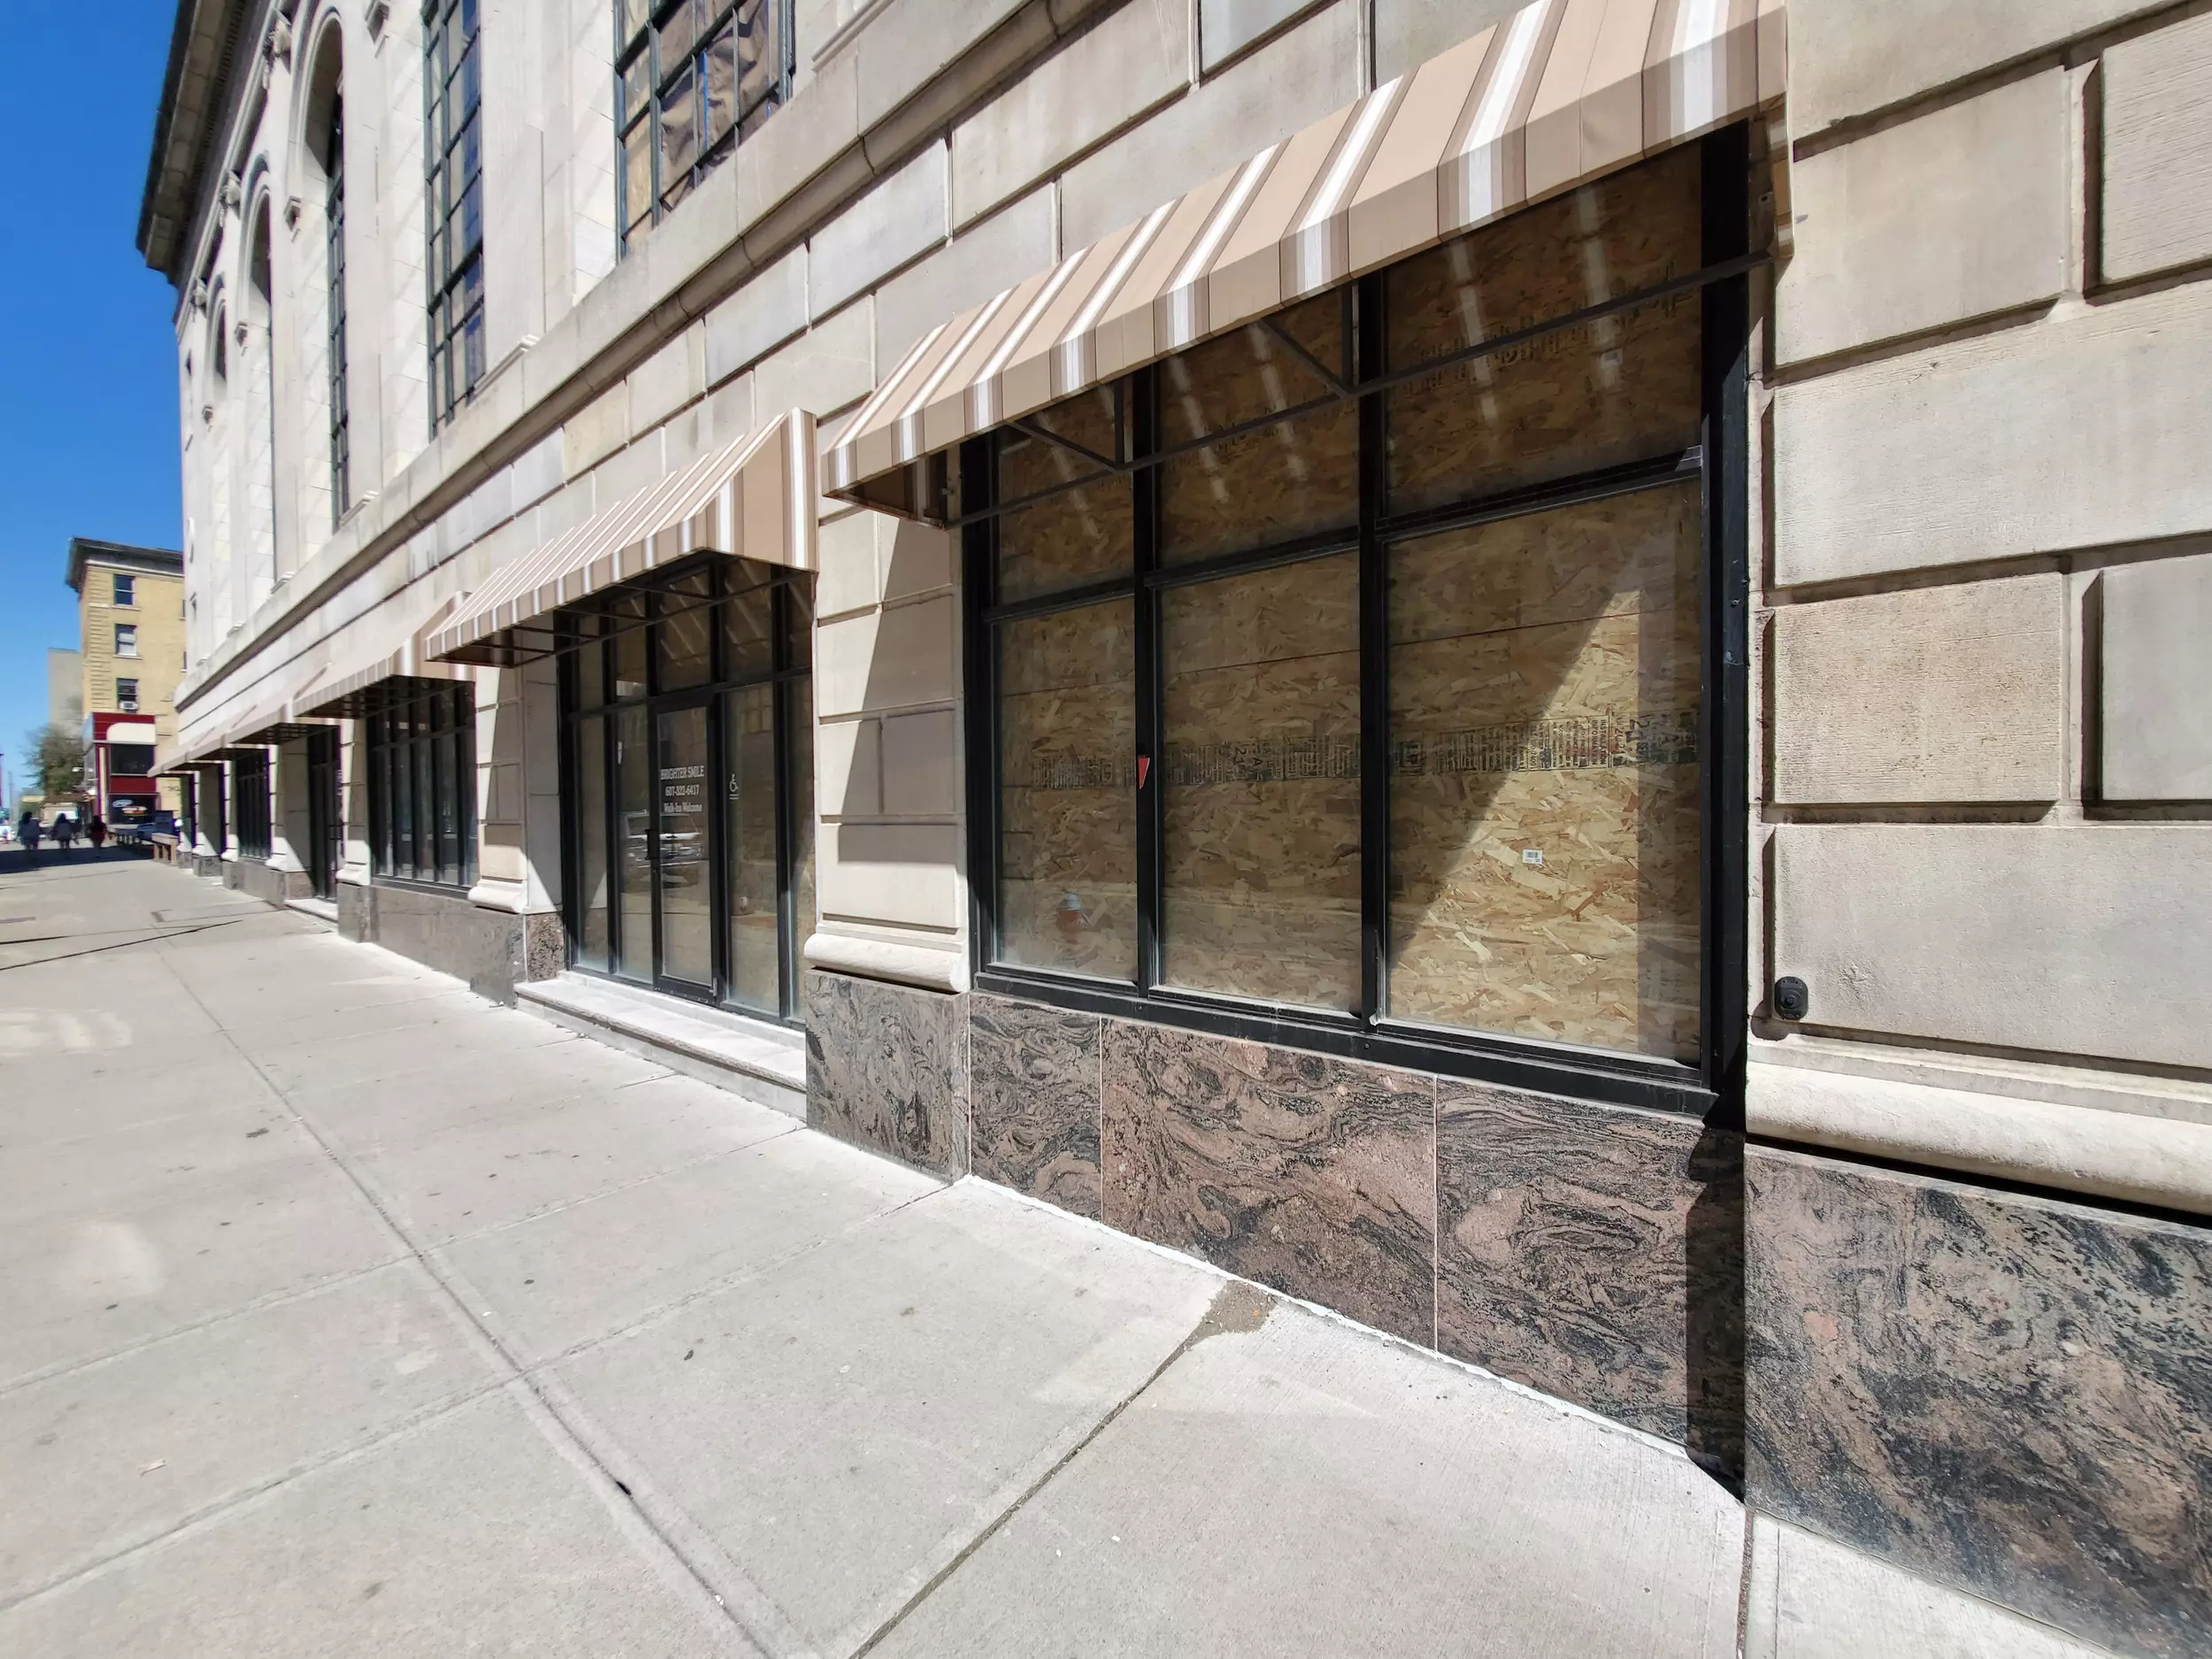 Historic Binghamton Building Boarded Up After Break-Ins, Threats